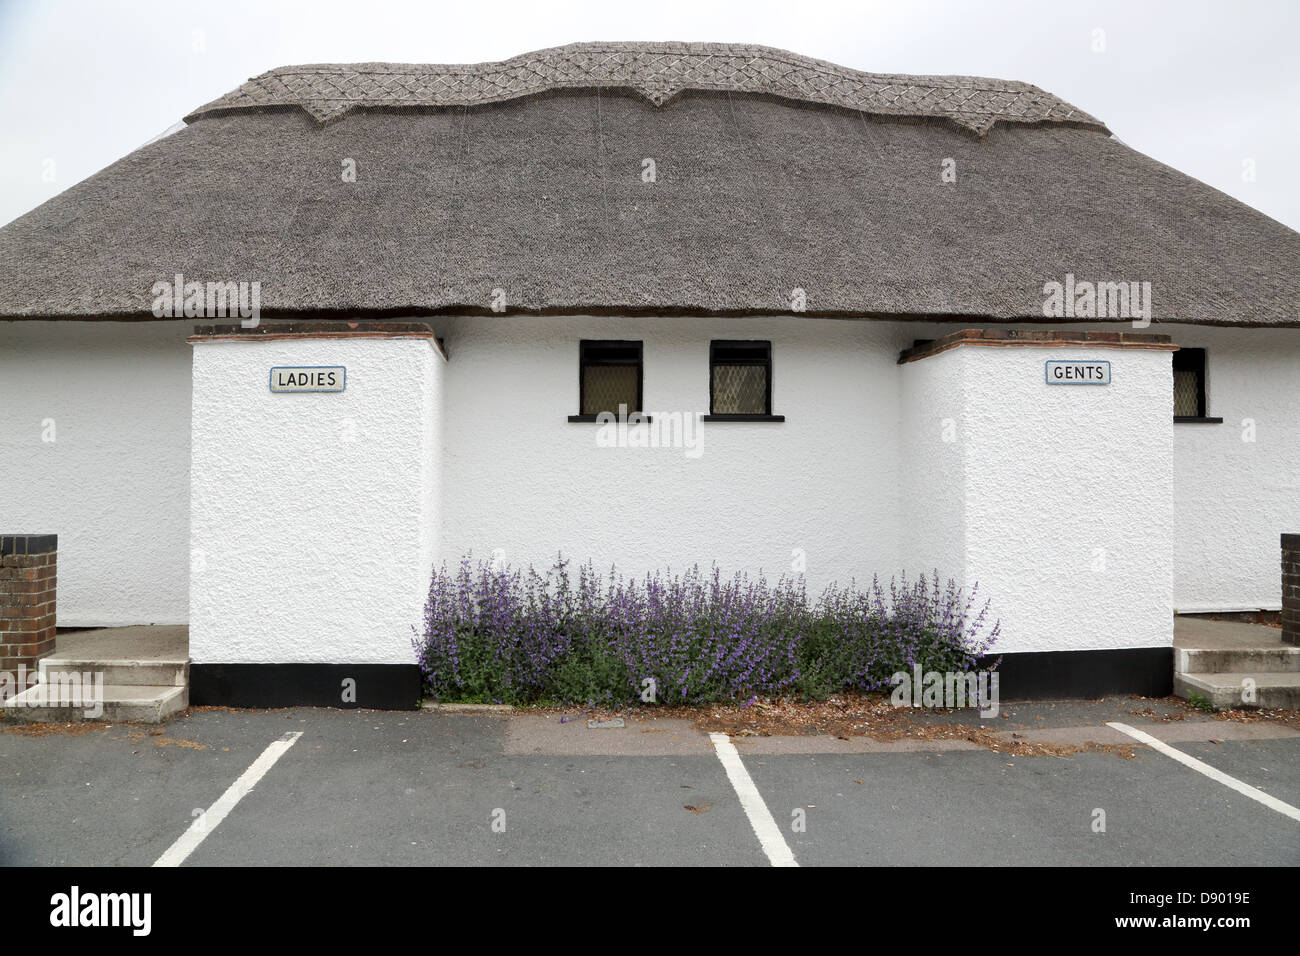 thatched public toilets at oulton broad in suffolk Stock Photo